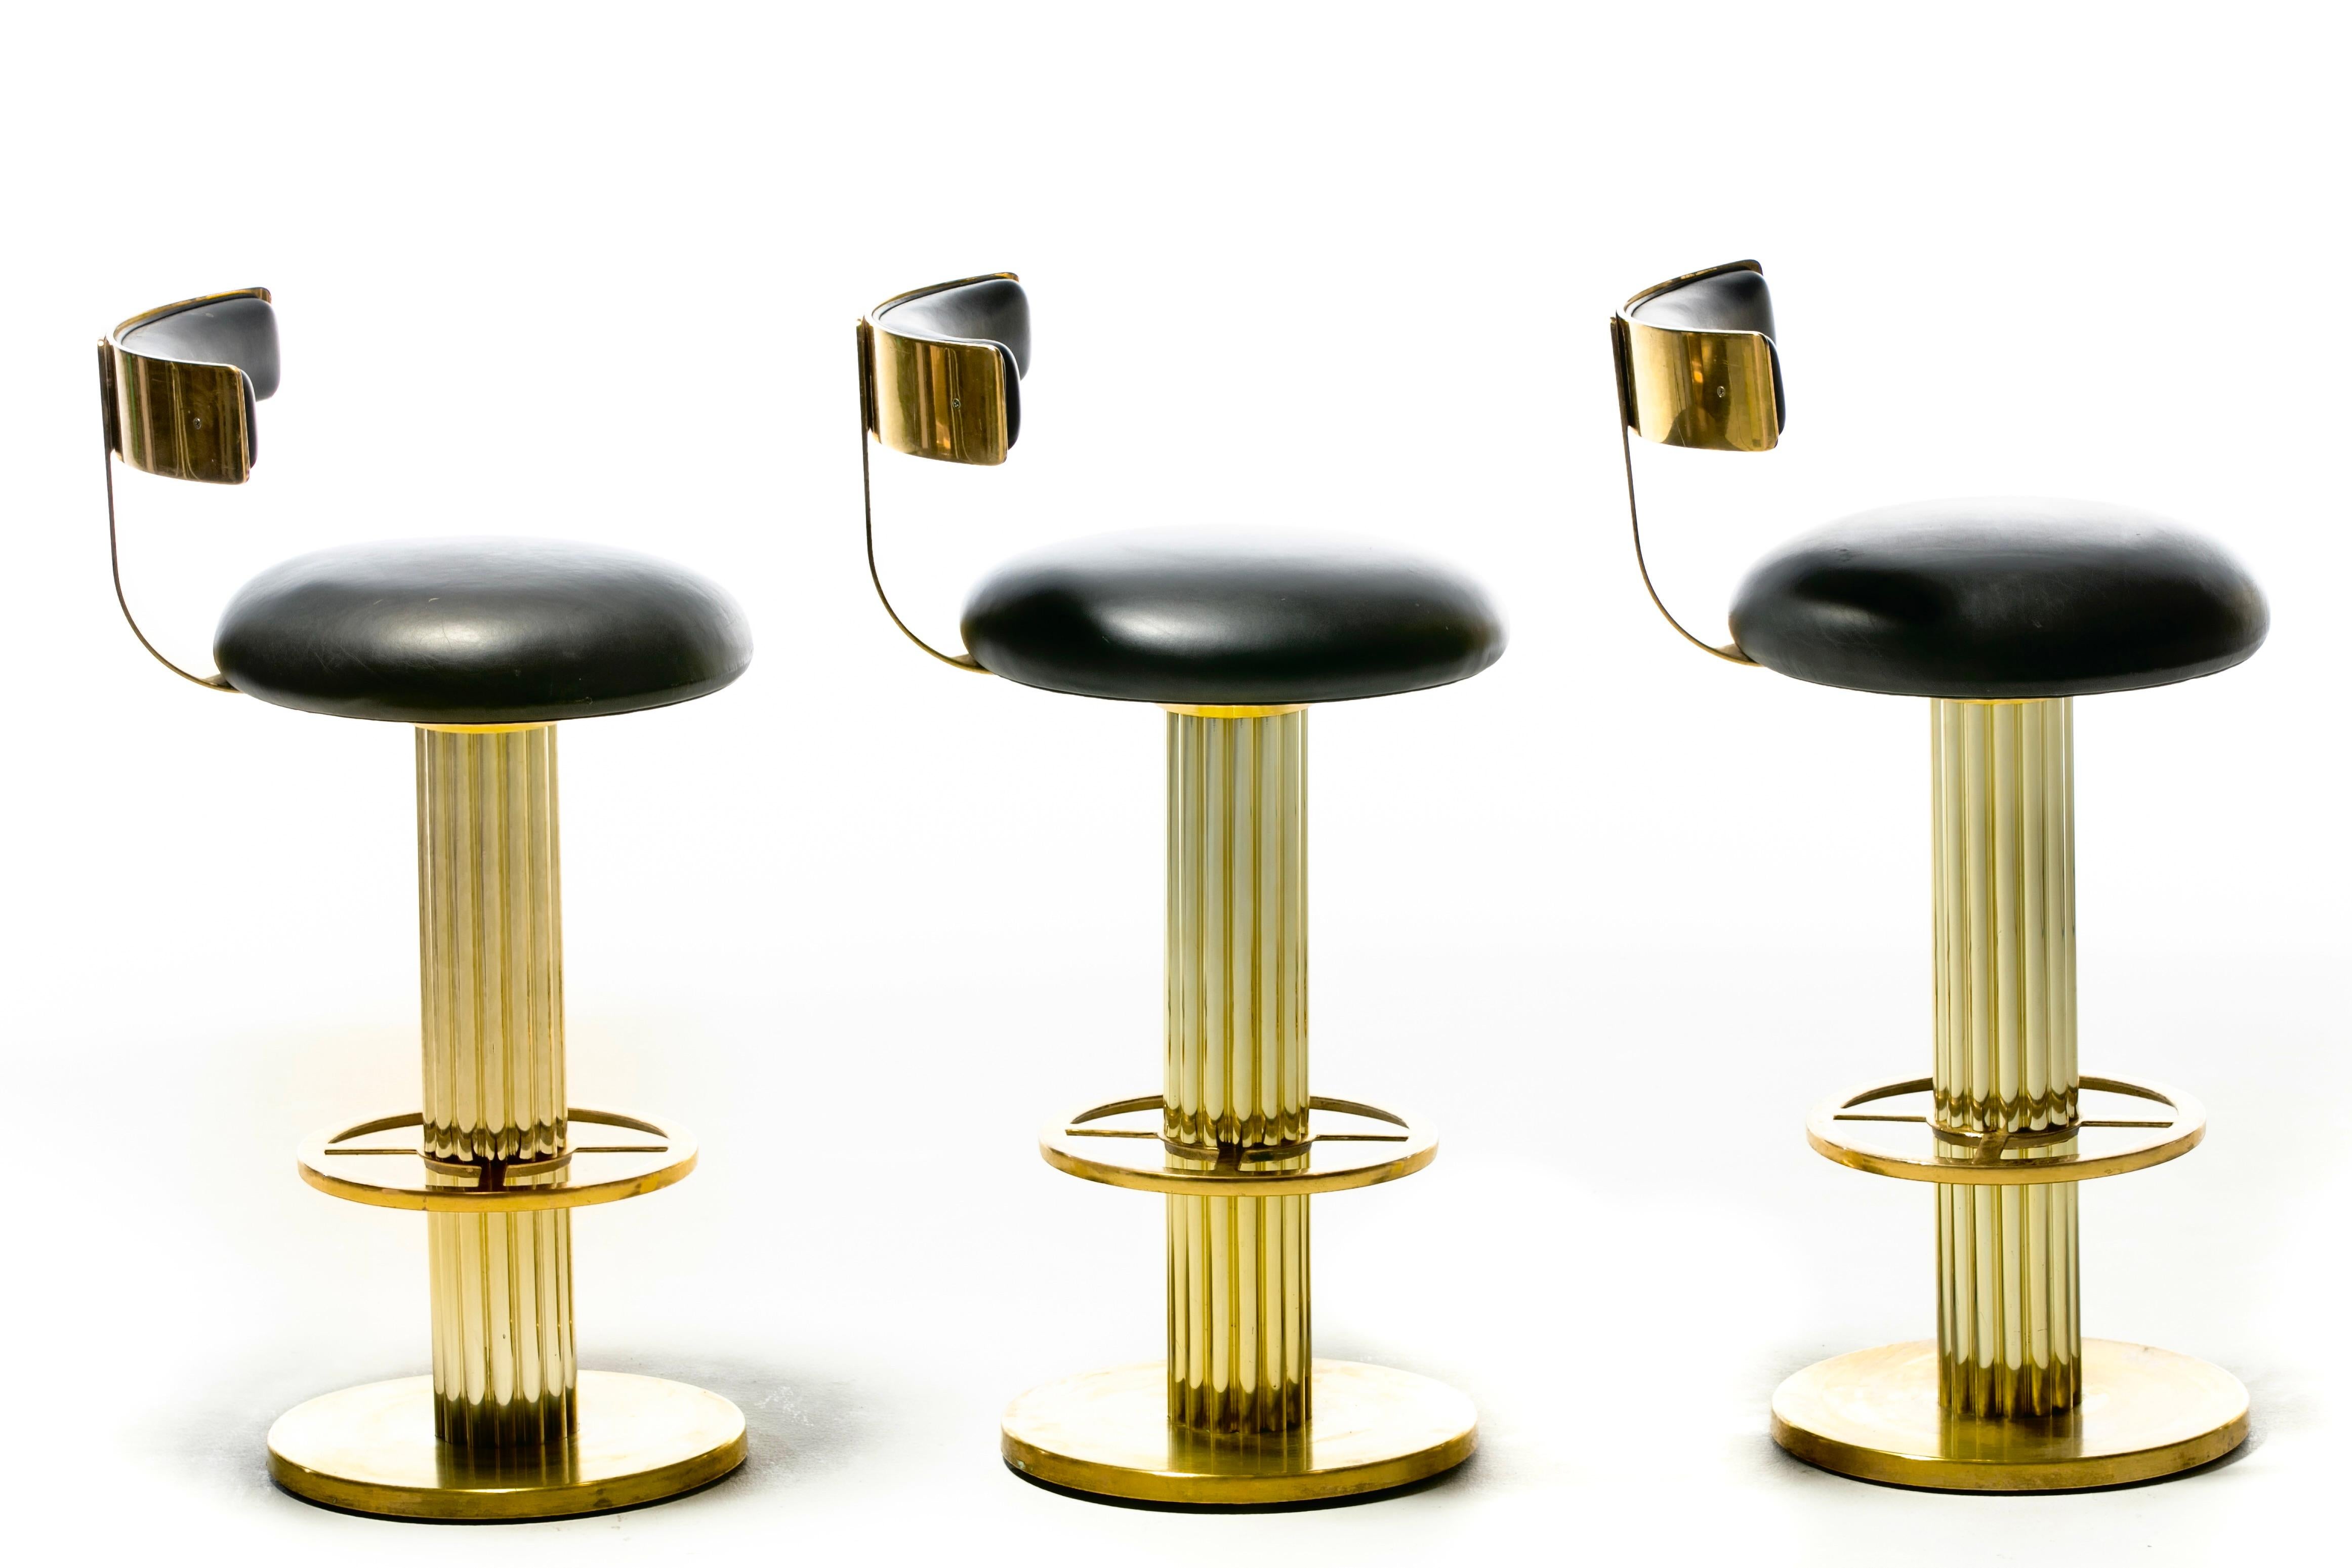 American Post Modern Brass Swivel Bar Stools by Design for Leisure c. 1980